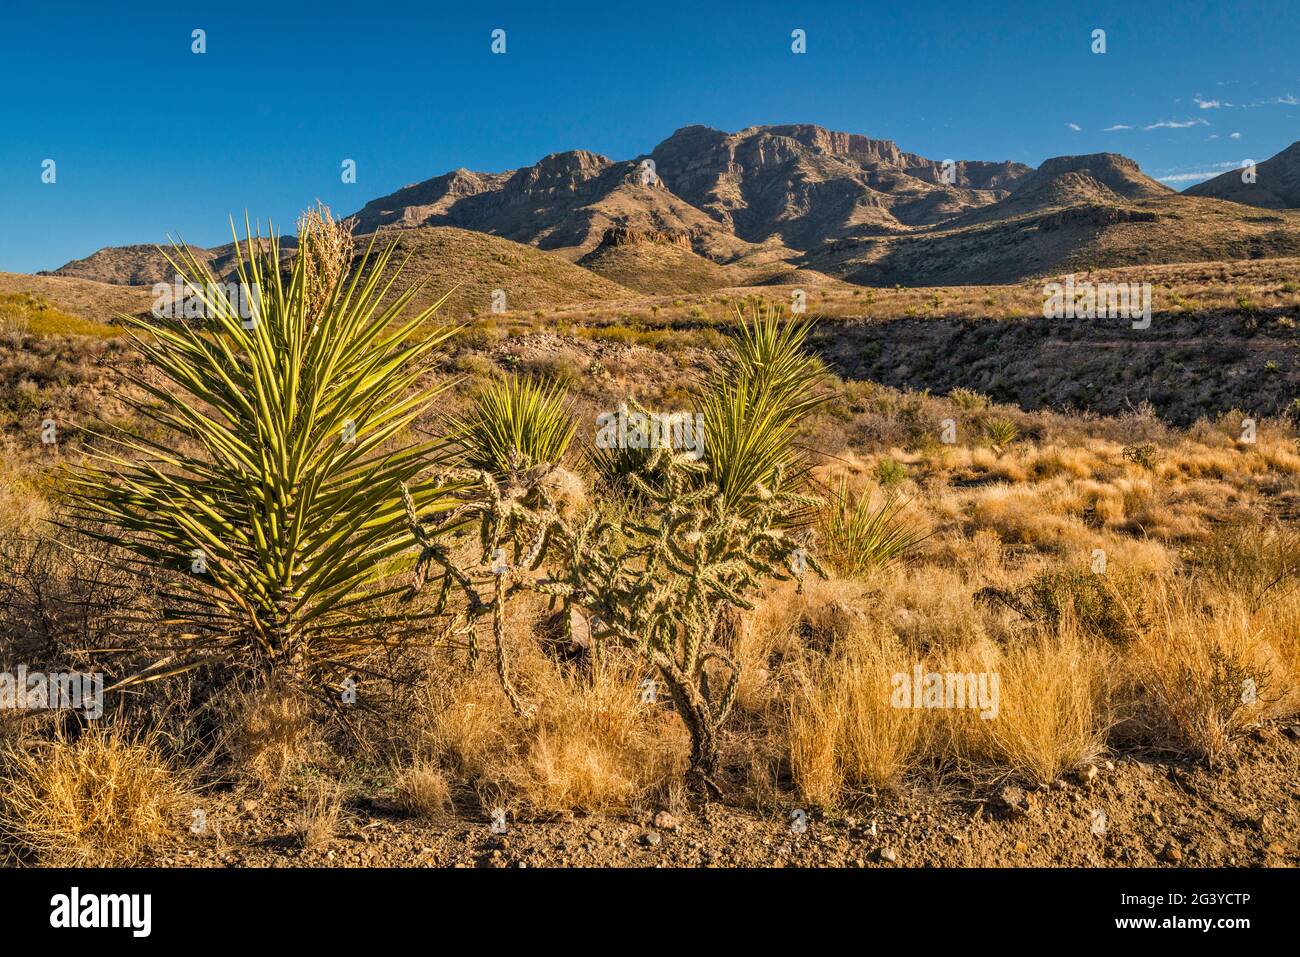 Yuccas, cholla cactus, Chinati Mountains, view from Pinto Canyon Road, Big Bend Country, Texas, USA Stock Photo